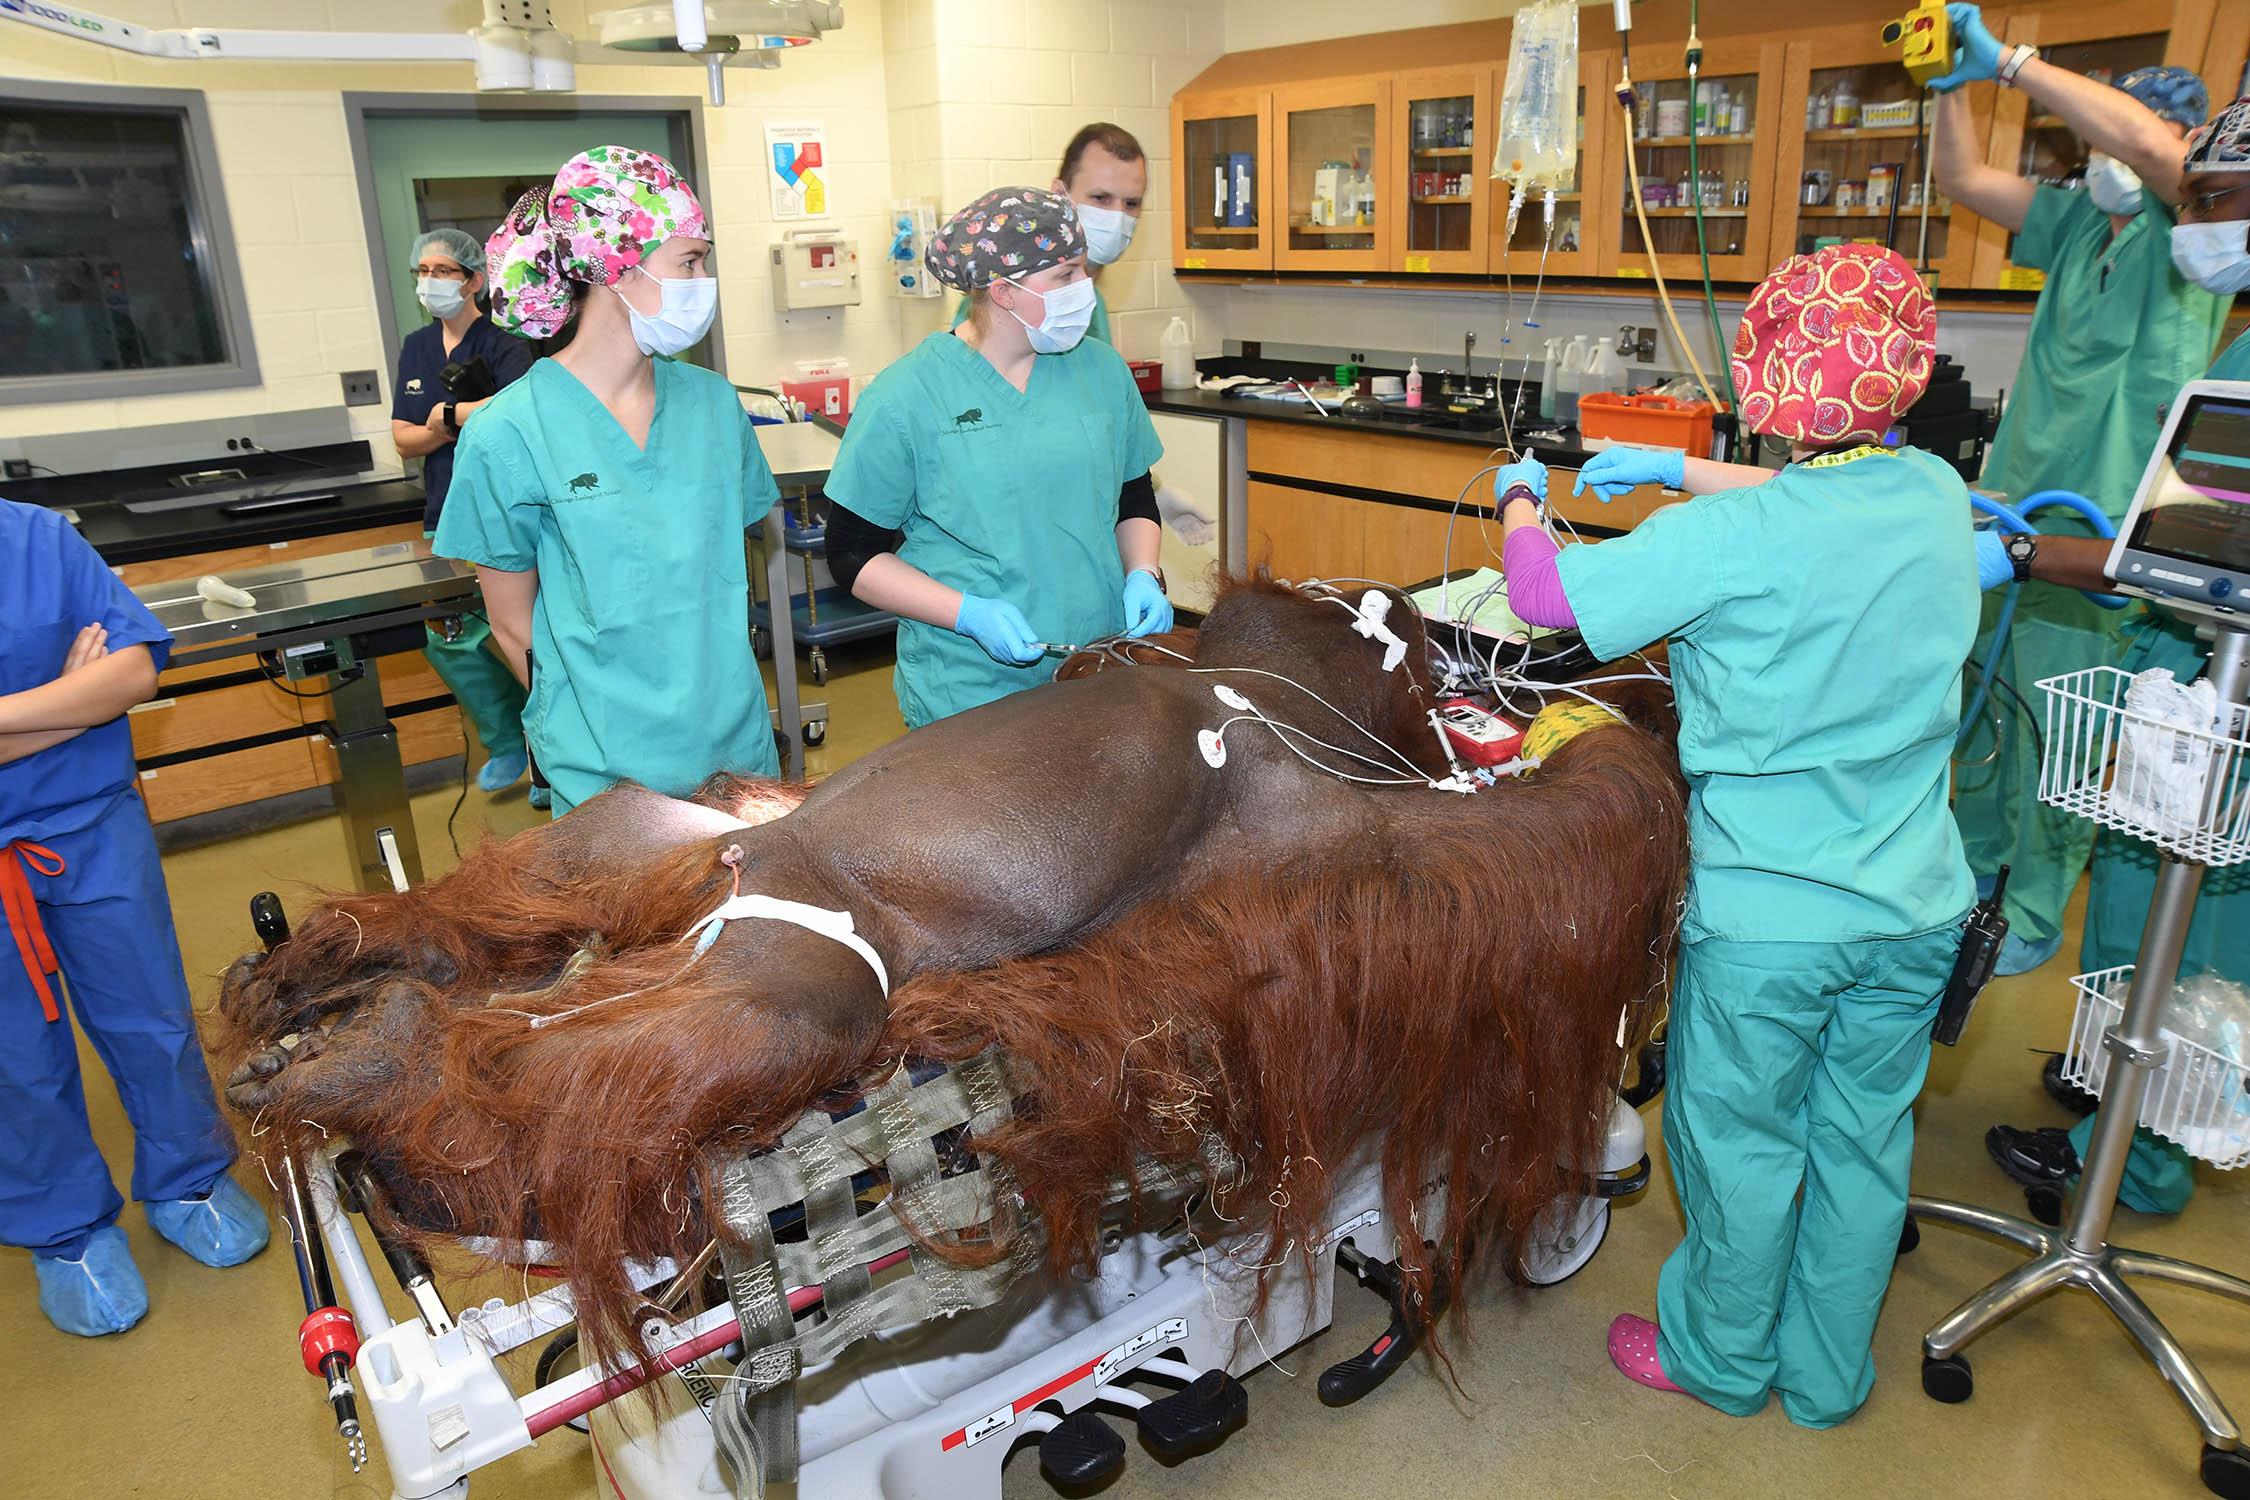 Ben, a 40-year-old orangutan at Brookfield Zoo, received an emergency appendectomy Jan. 23 to remove a ruptured appendix. (Jim Schulz / Chicago Zoological Society)